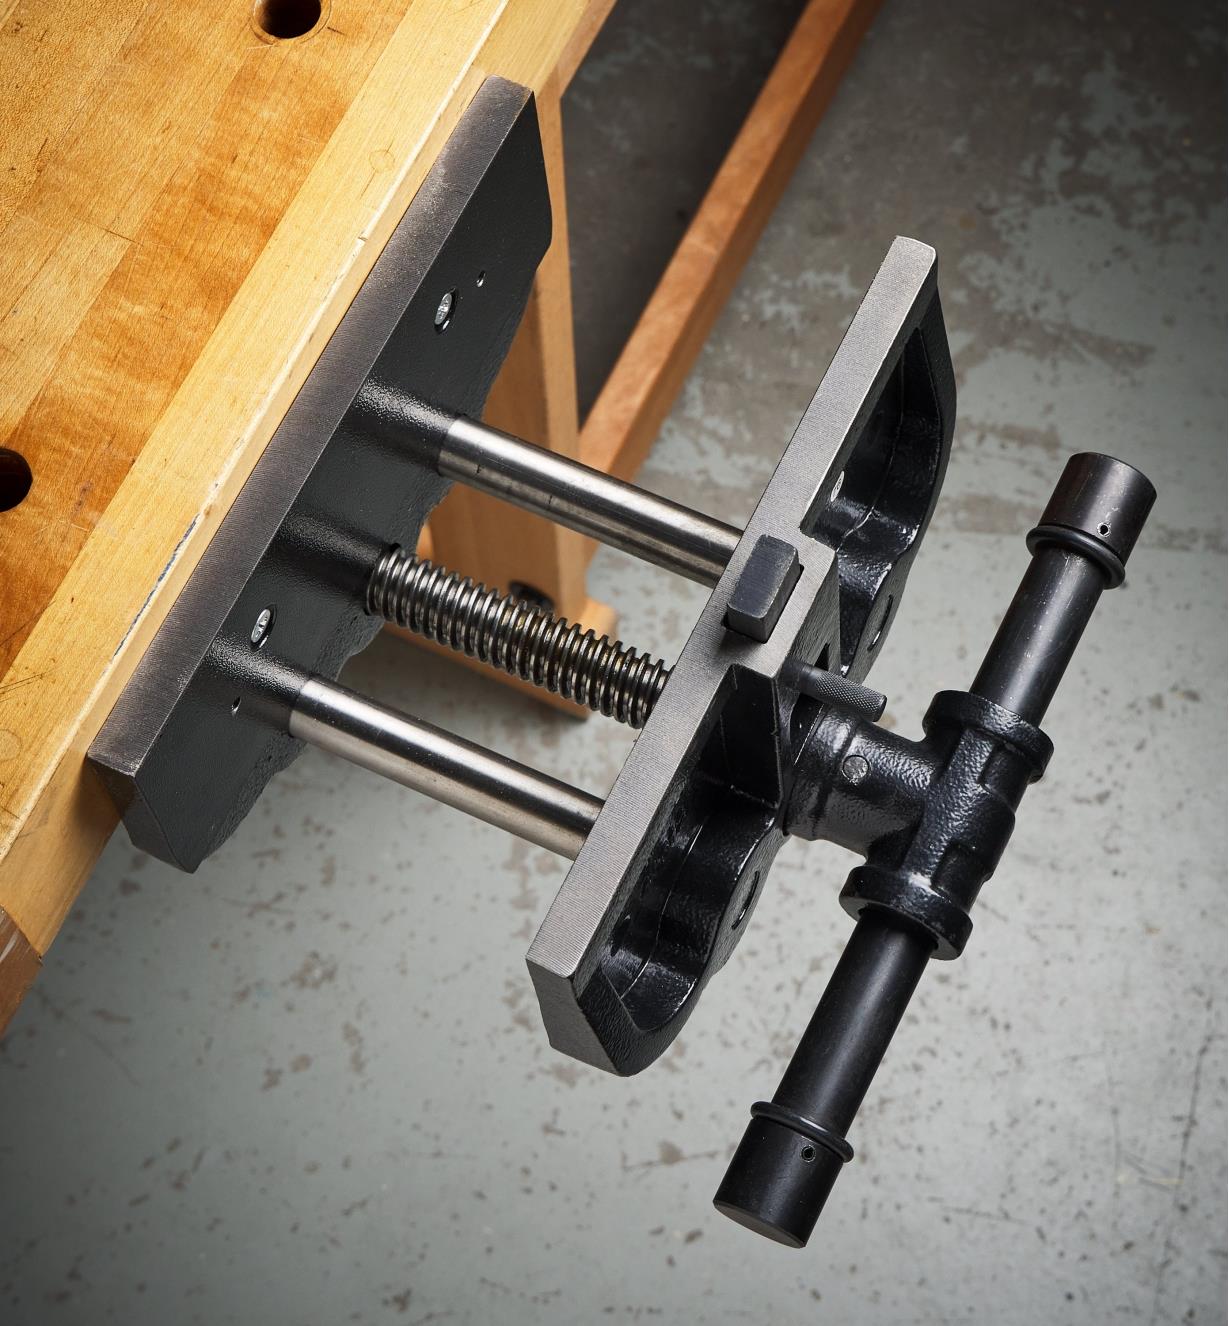 A top view of a Jorgensen quick-release bench vise installed on a workbench